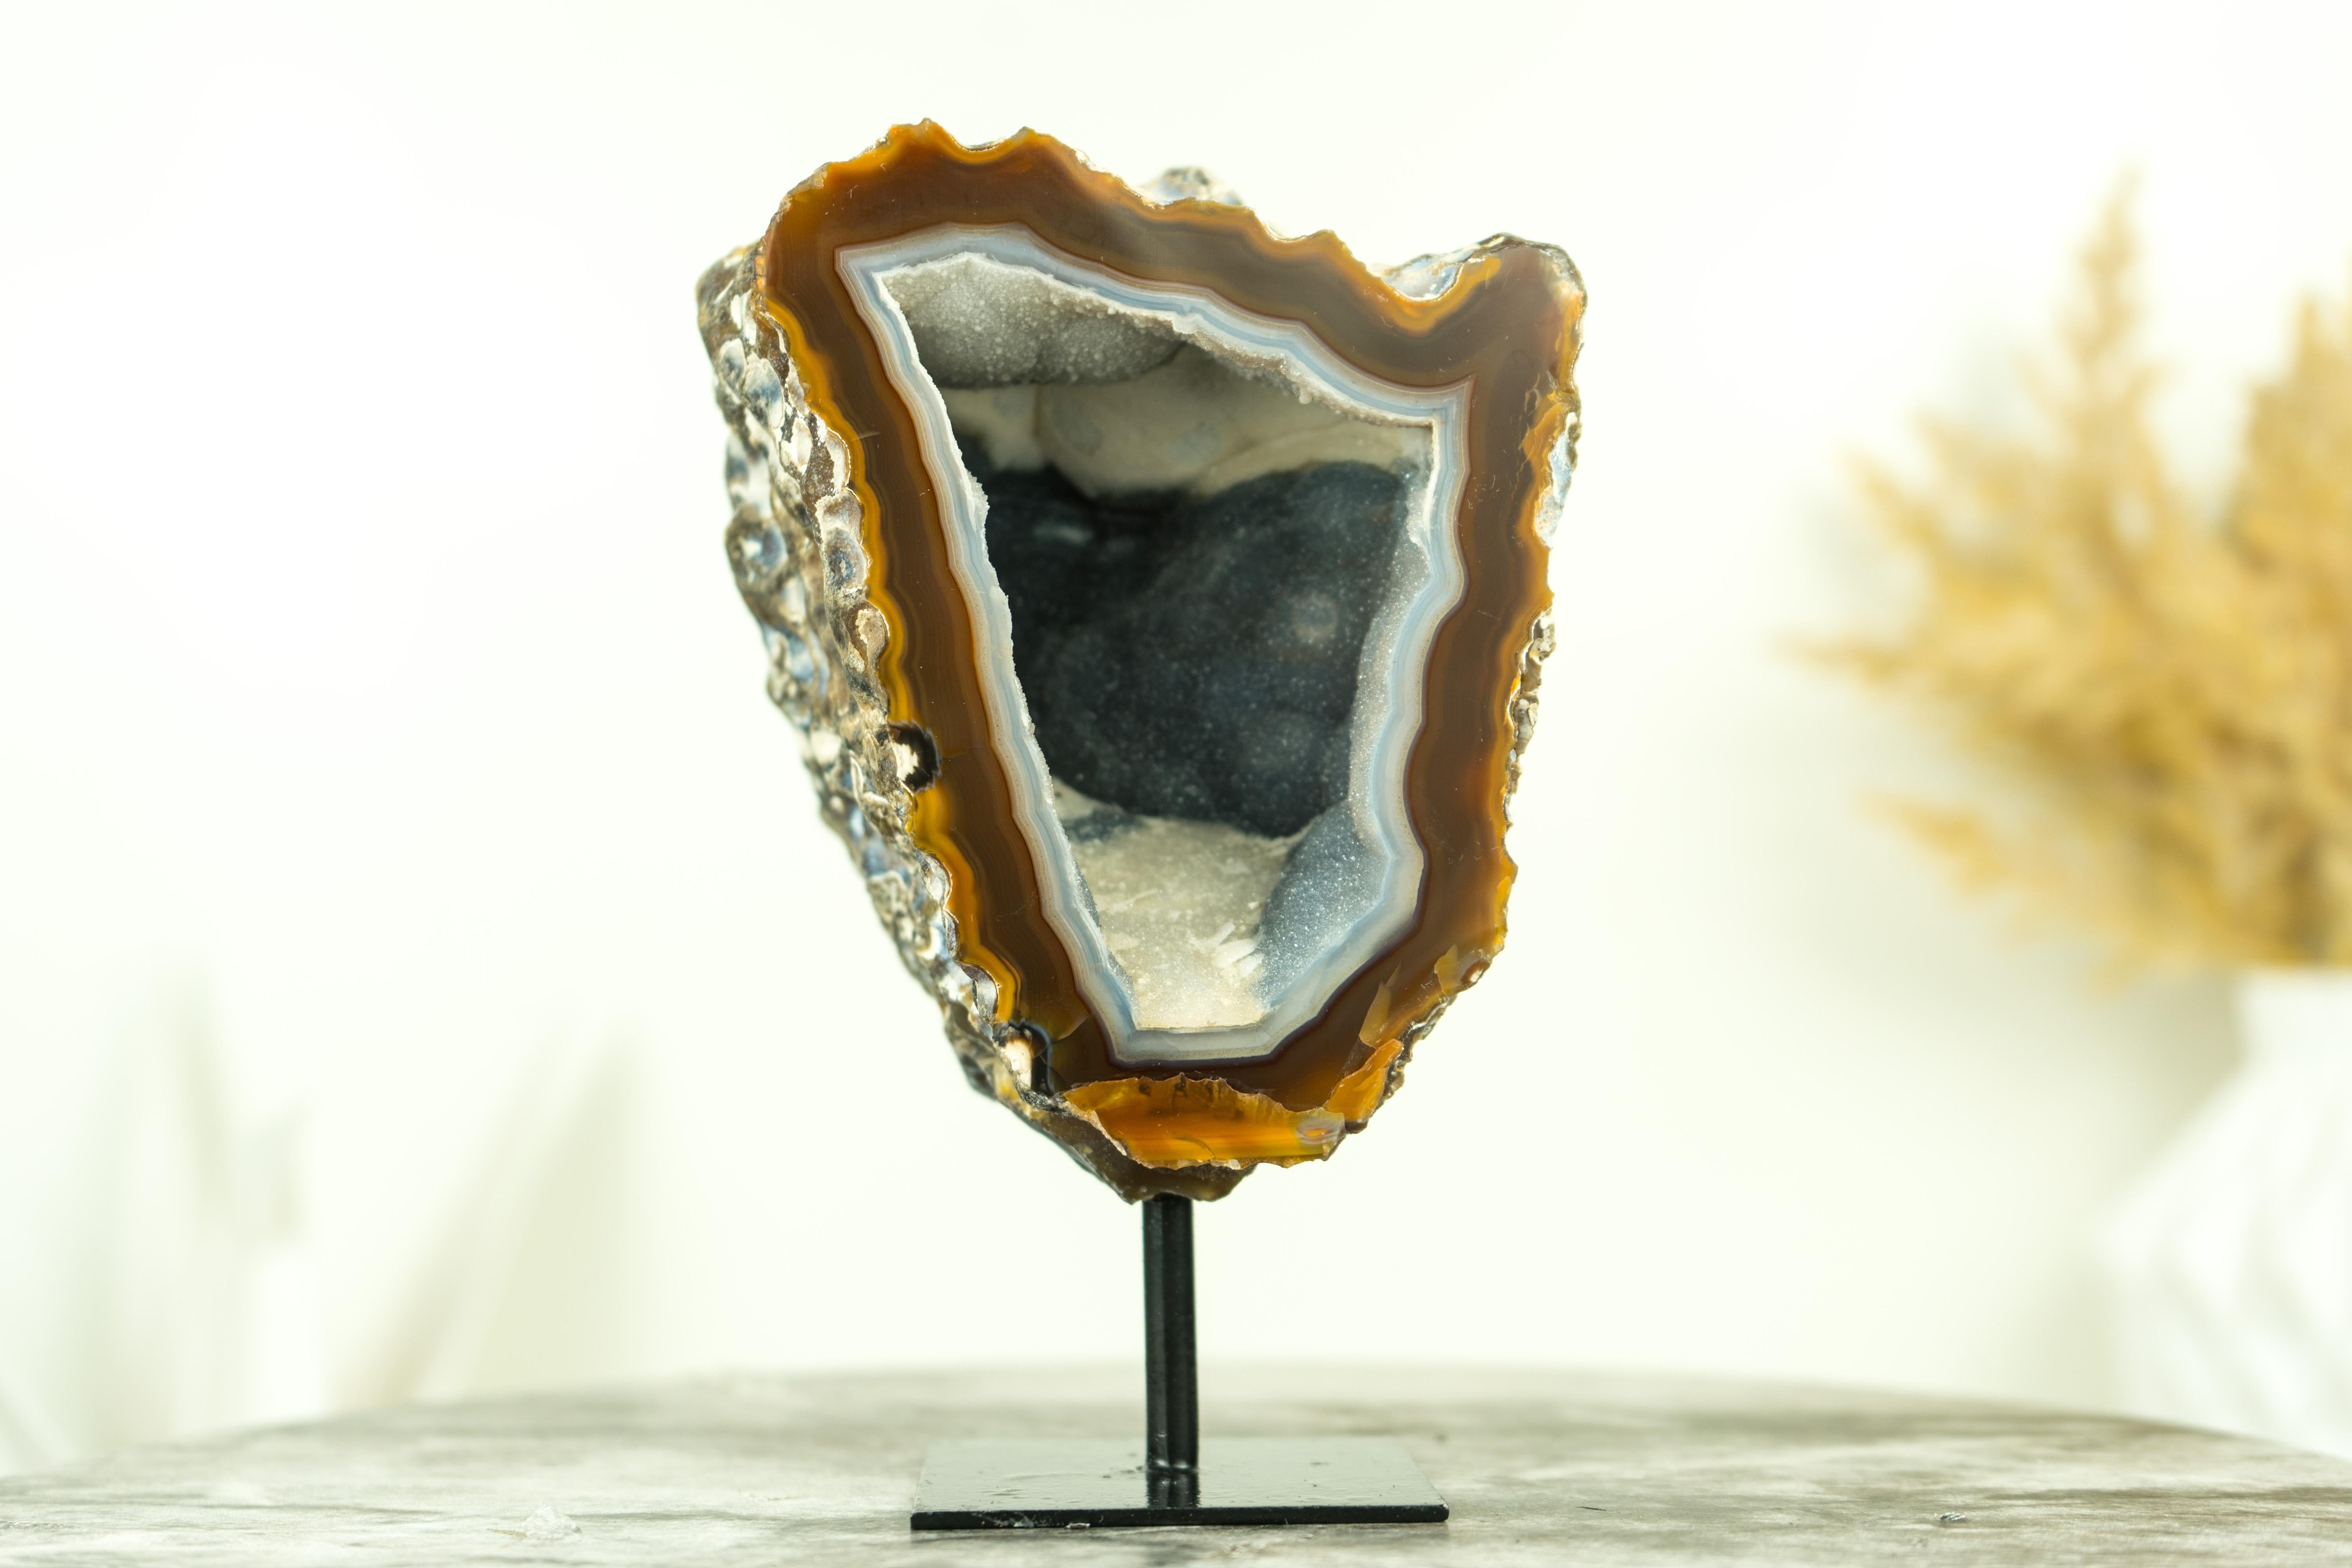 Gallery Grade Amber and White Lace Agate Geode with Blue Galaxy Druzy For Sale 3